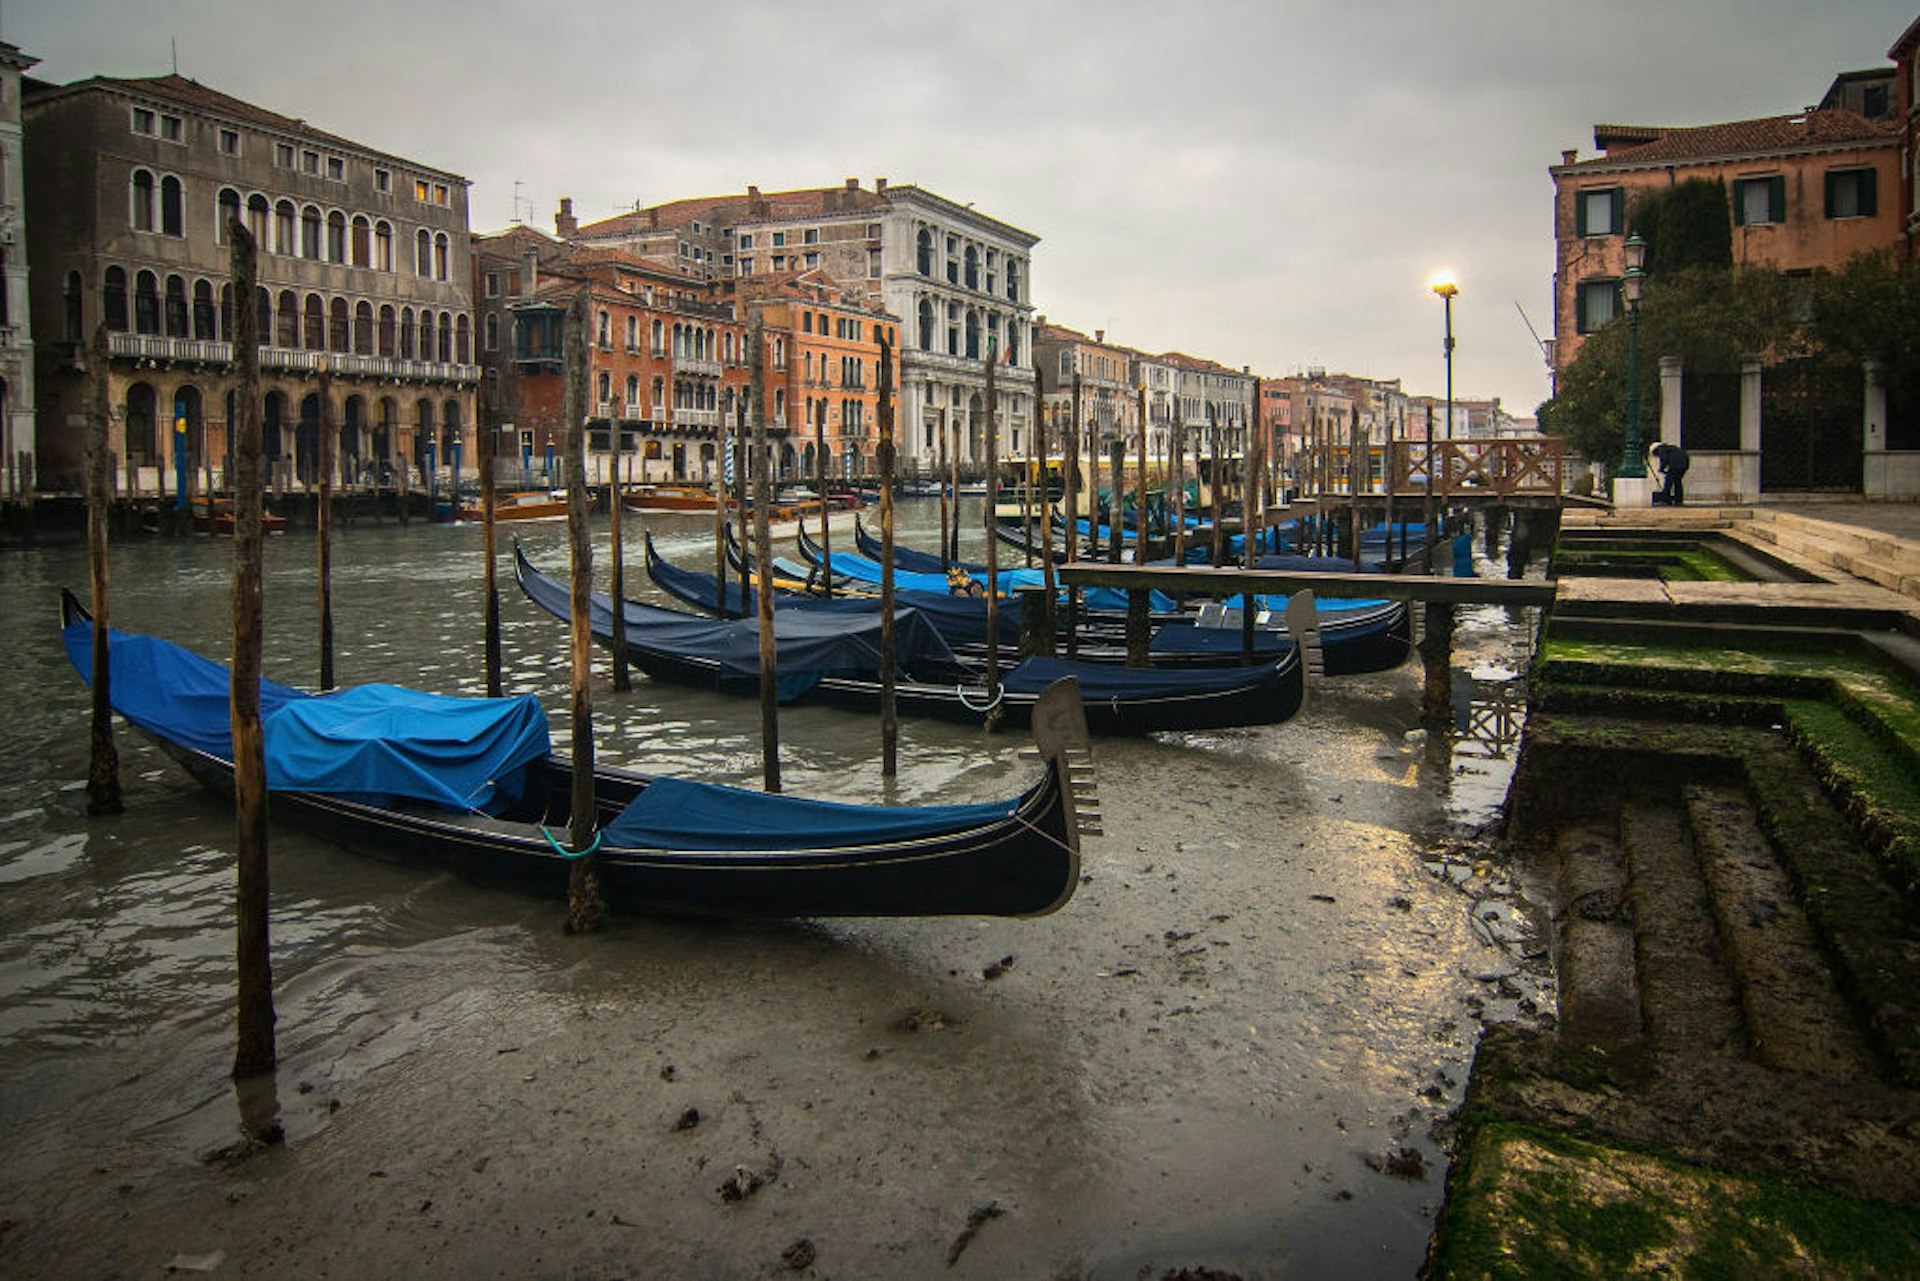  Gondolas are stucked along the Grand Canal near Rialto bridge because of an exceptional low tide.